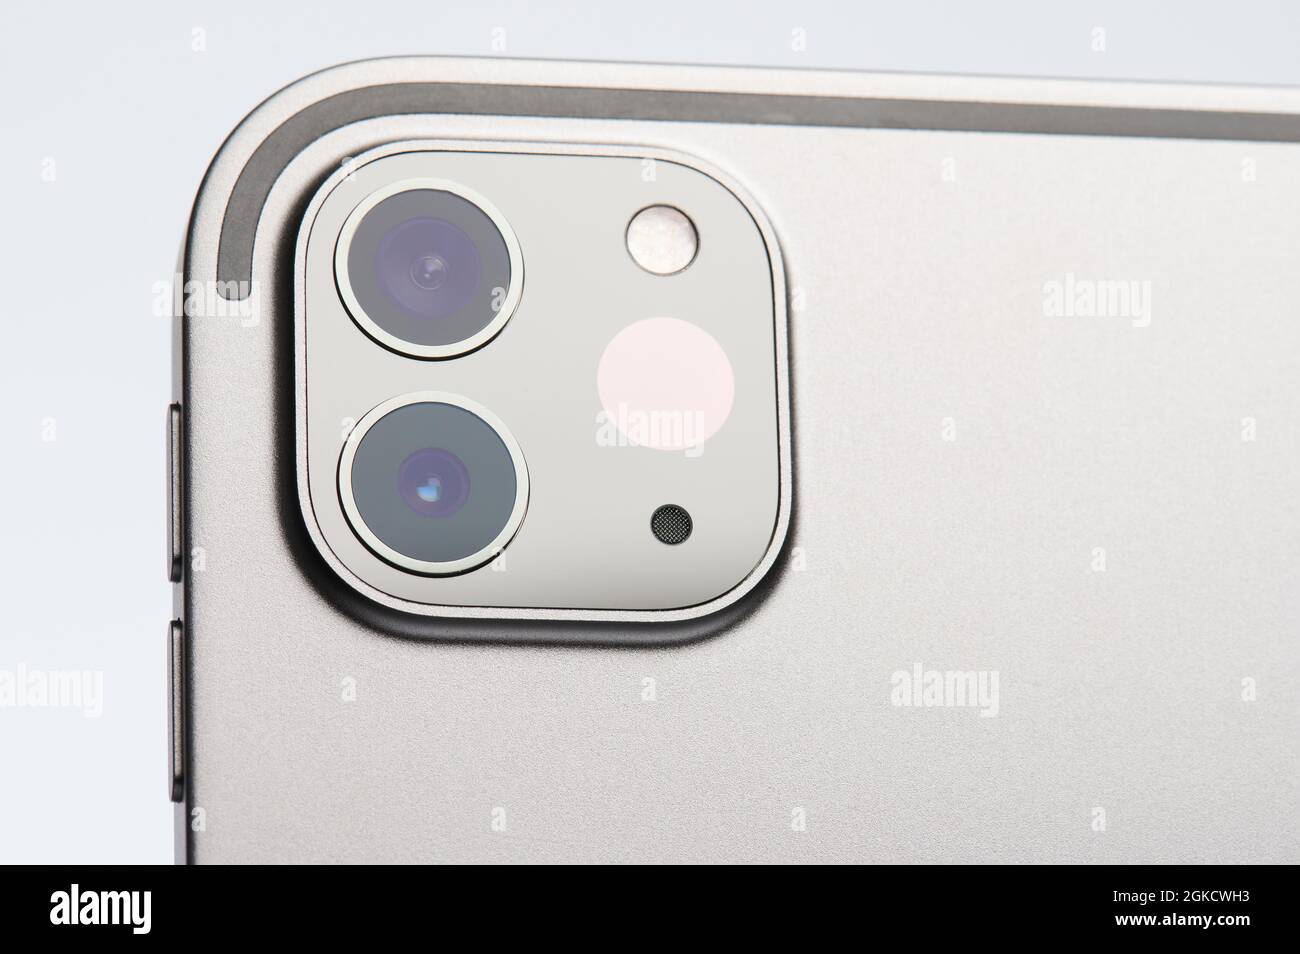 New york, USA - September 3 2021: Camera on apple ipad pro tablet close up view isolated Stock Photo